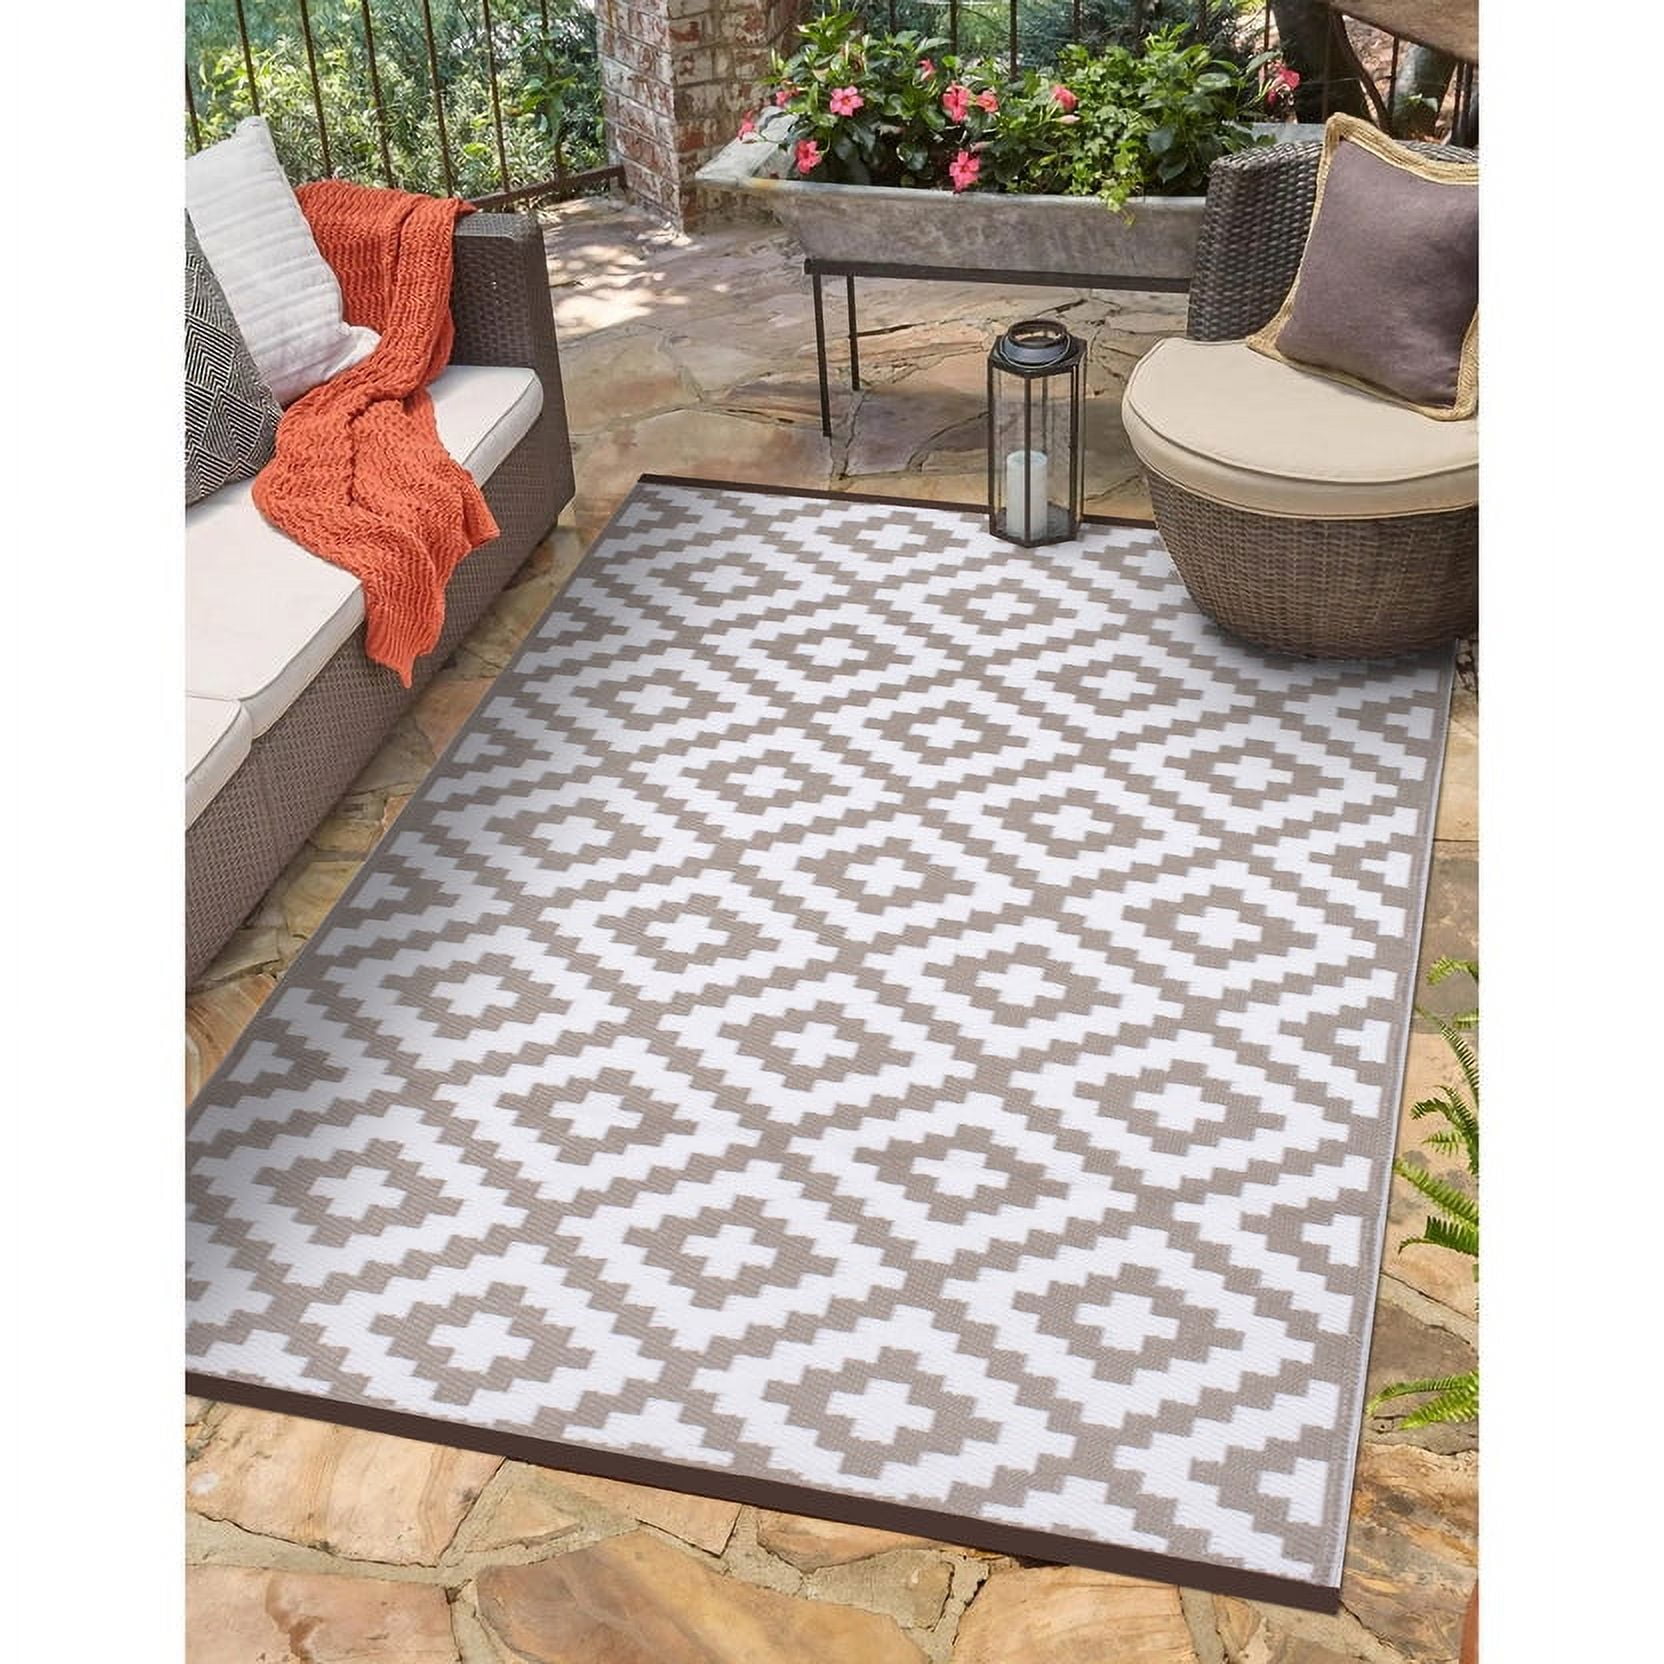 Black and White Indoor Outdoor Rug, 5'x8' Cotton Striped Reversible  Washable Modern Farmhouse Rug, Hand-Woven Large Patios Area Rug Carpet Mat  for